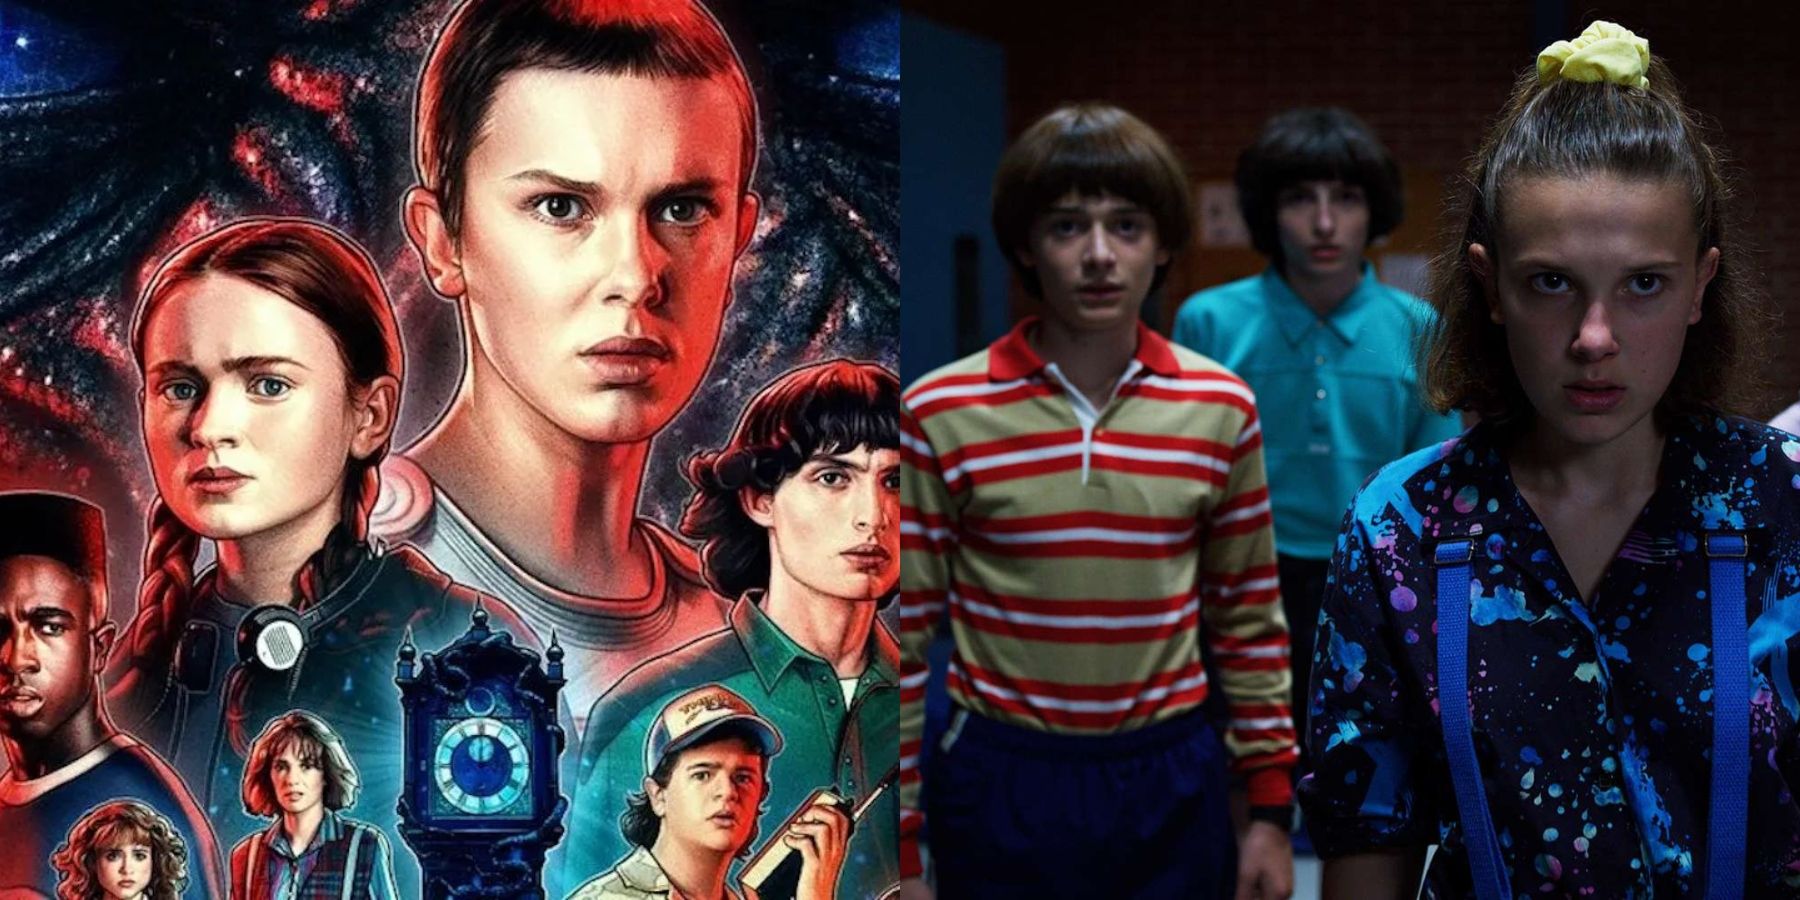 Split image of Stranger Things season 4 poster and Will Byers, Mike Wheeler and Eleven